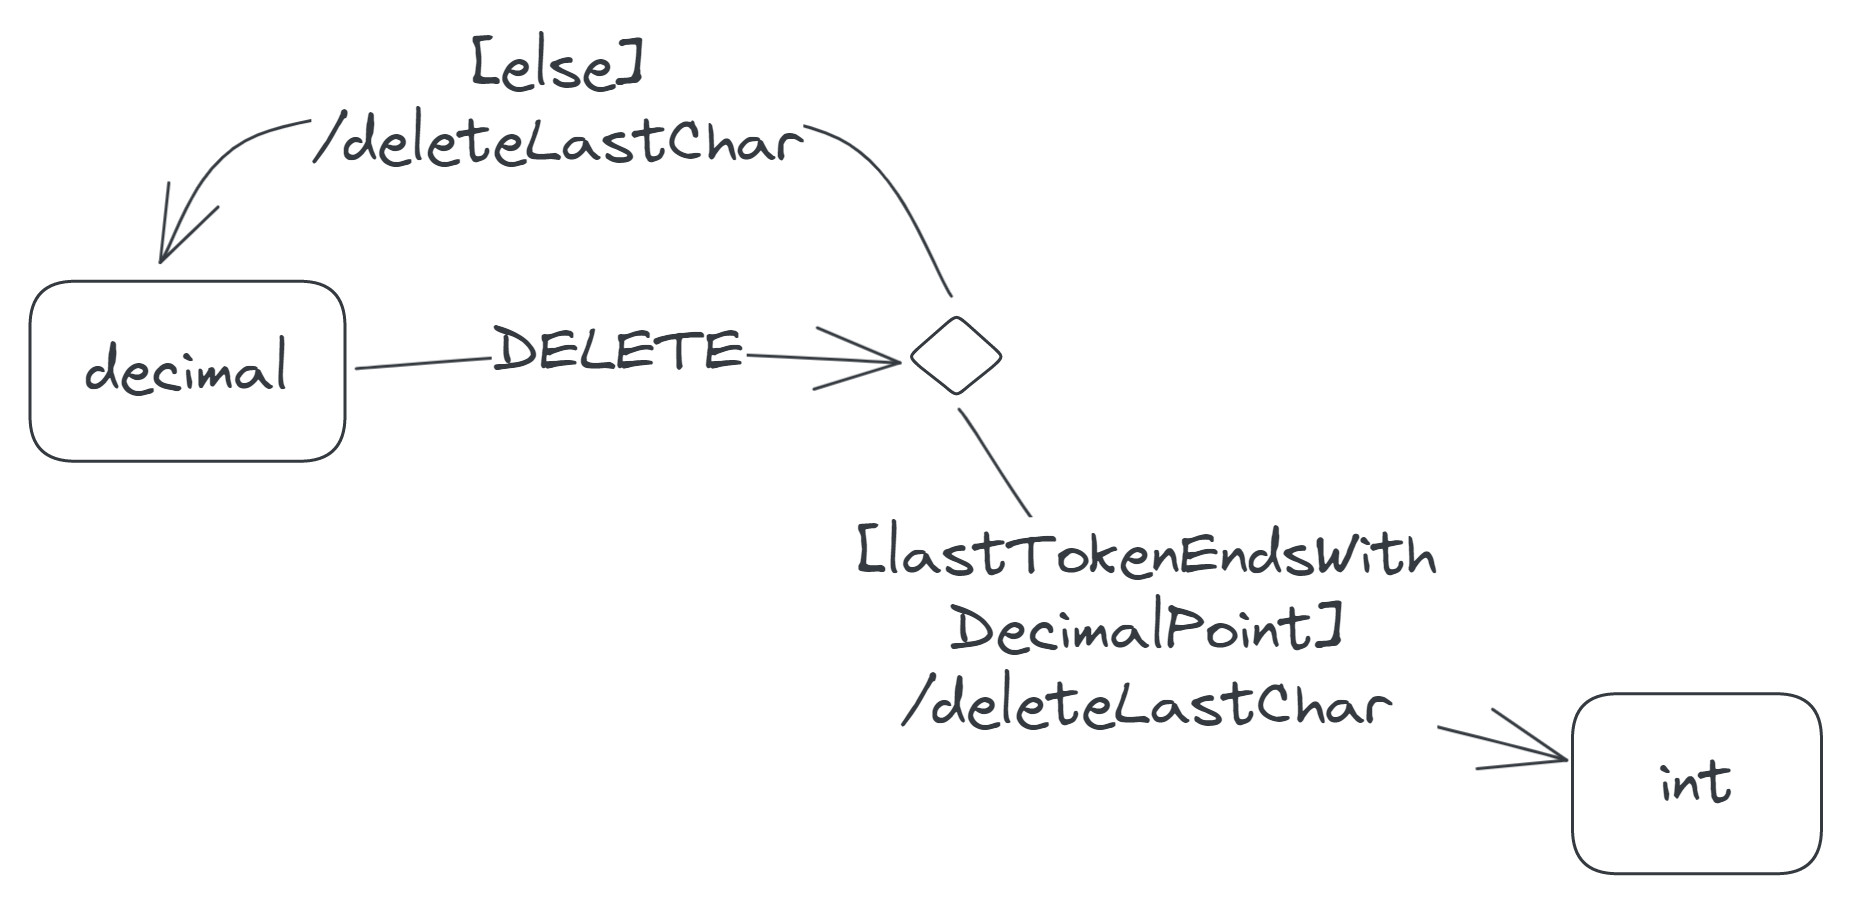 Two DELETE transitions from the decimal state: one labelled '[lastTokenEndsWithDecimalPoint]/deleteLastChar' entering the int state, and another labelled '[else]/deleteLastChar' reentering the decimal state.